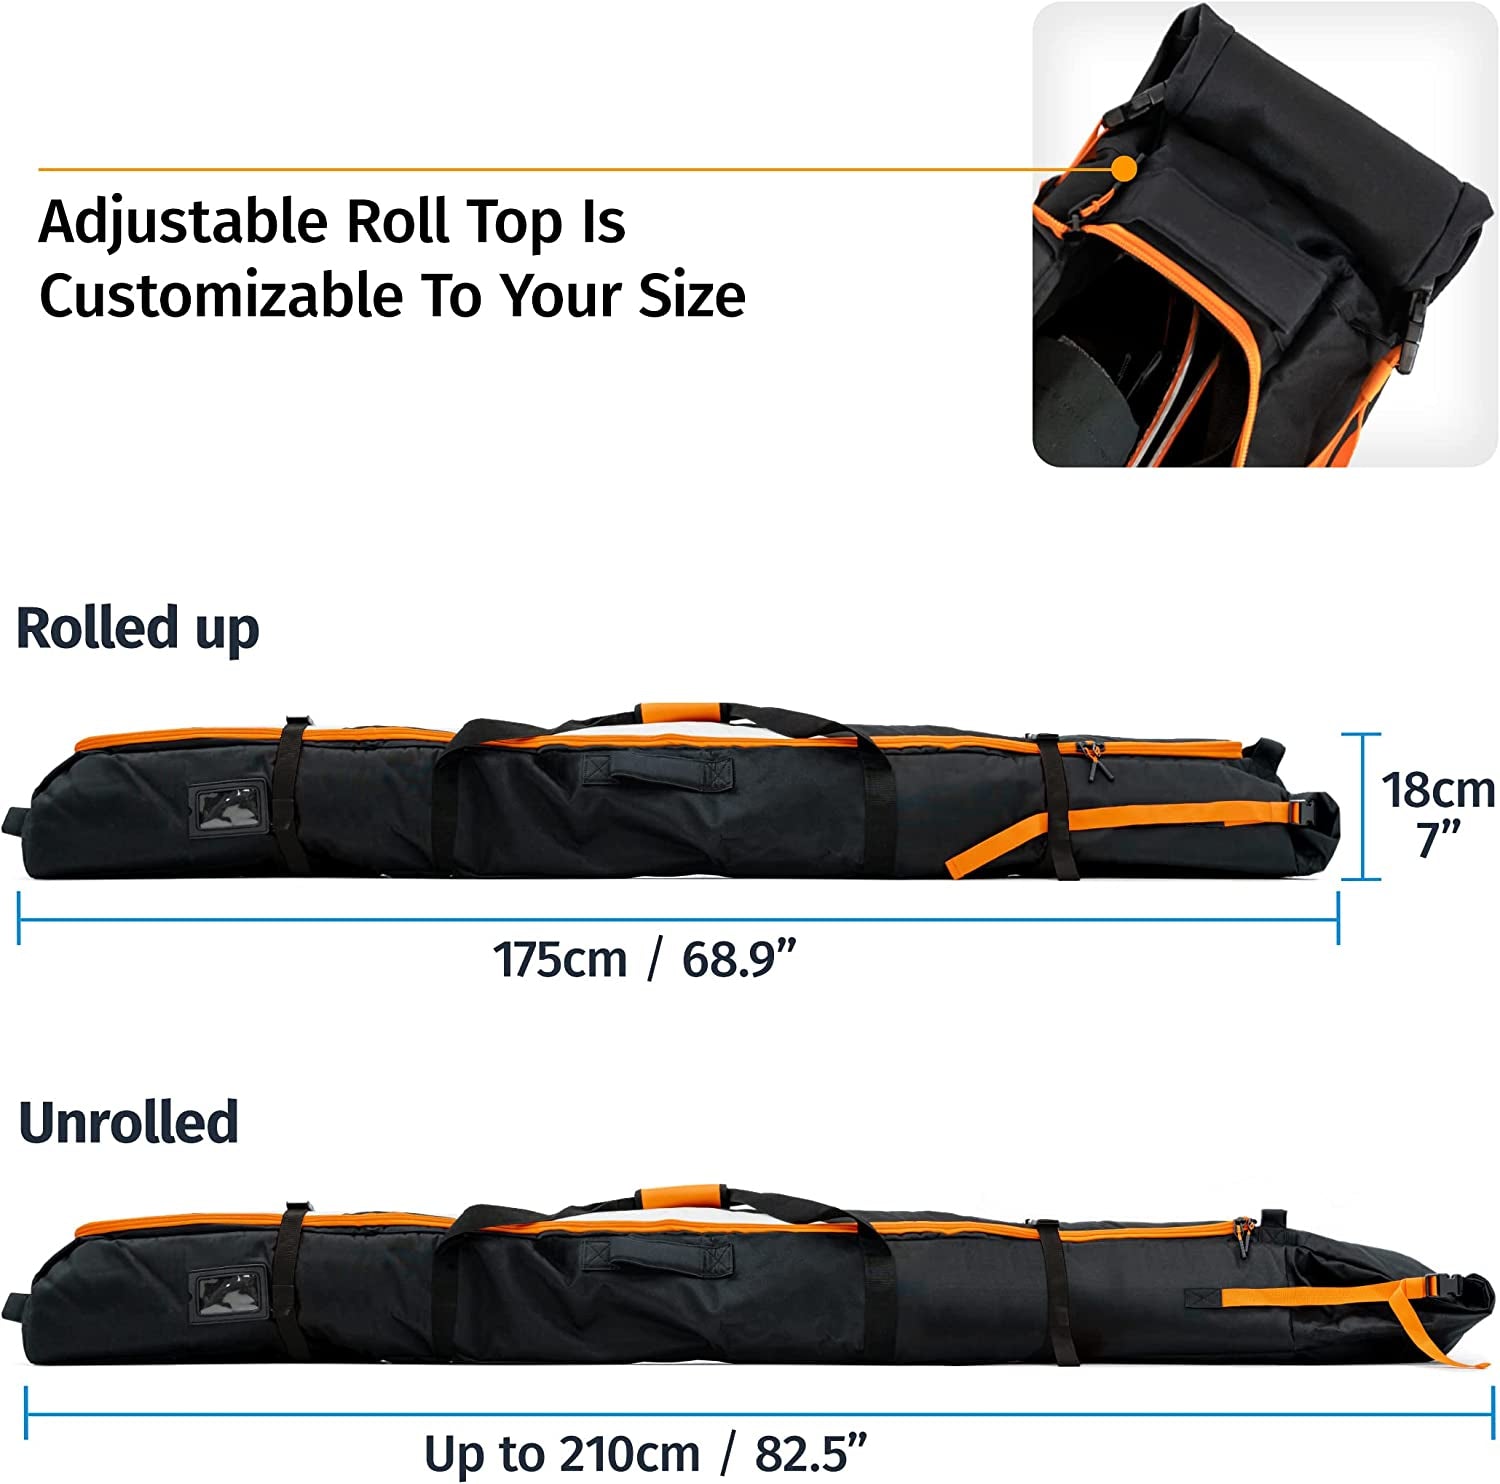 Ski Bag and Ski Boot Bag Combo for Air Travel Unpadded - Ski Luggage Bags for Snow Travel Gear - Ski Case for Cross Country, Downhill, Boots, Helmet, Poles, Clothes and Accessories